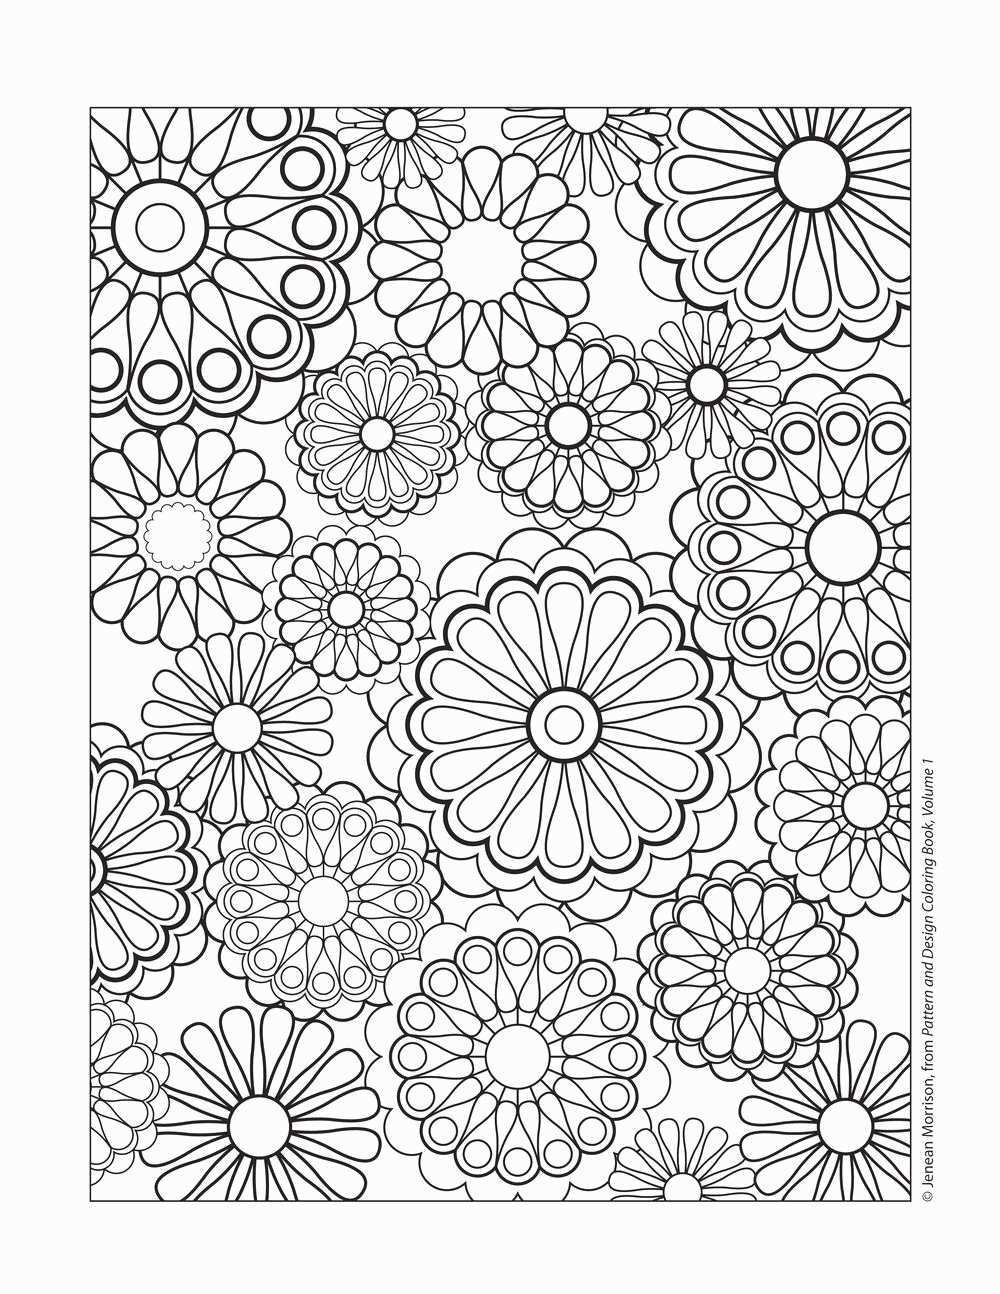 30 Famous Colorful Vases Images 2024 free download colorful vases images of colored pages fresh cool vases flower vase coloring page pages pertaining to colored pages fresh cool vases flower vase coloring page pages flowers in a top i 0d